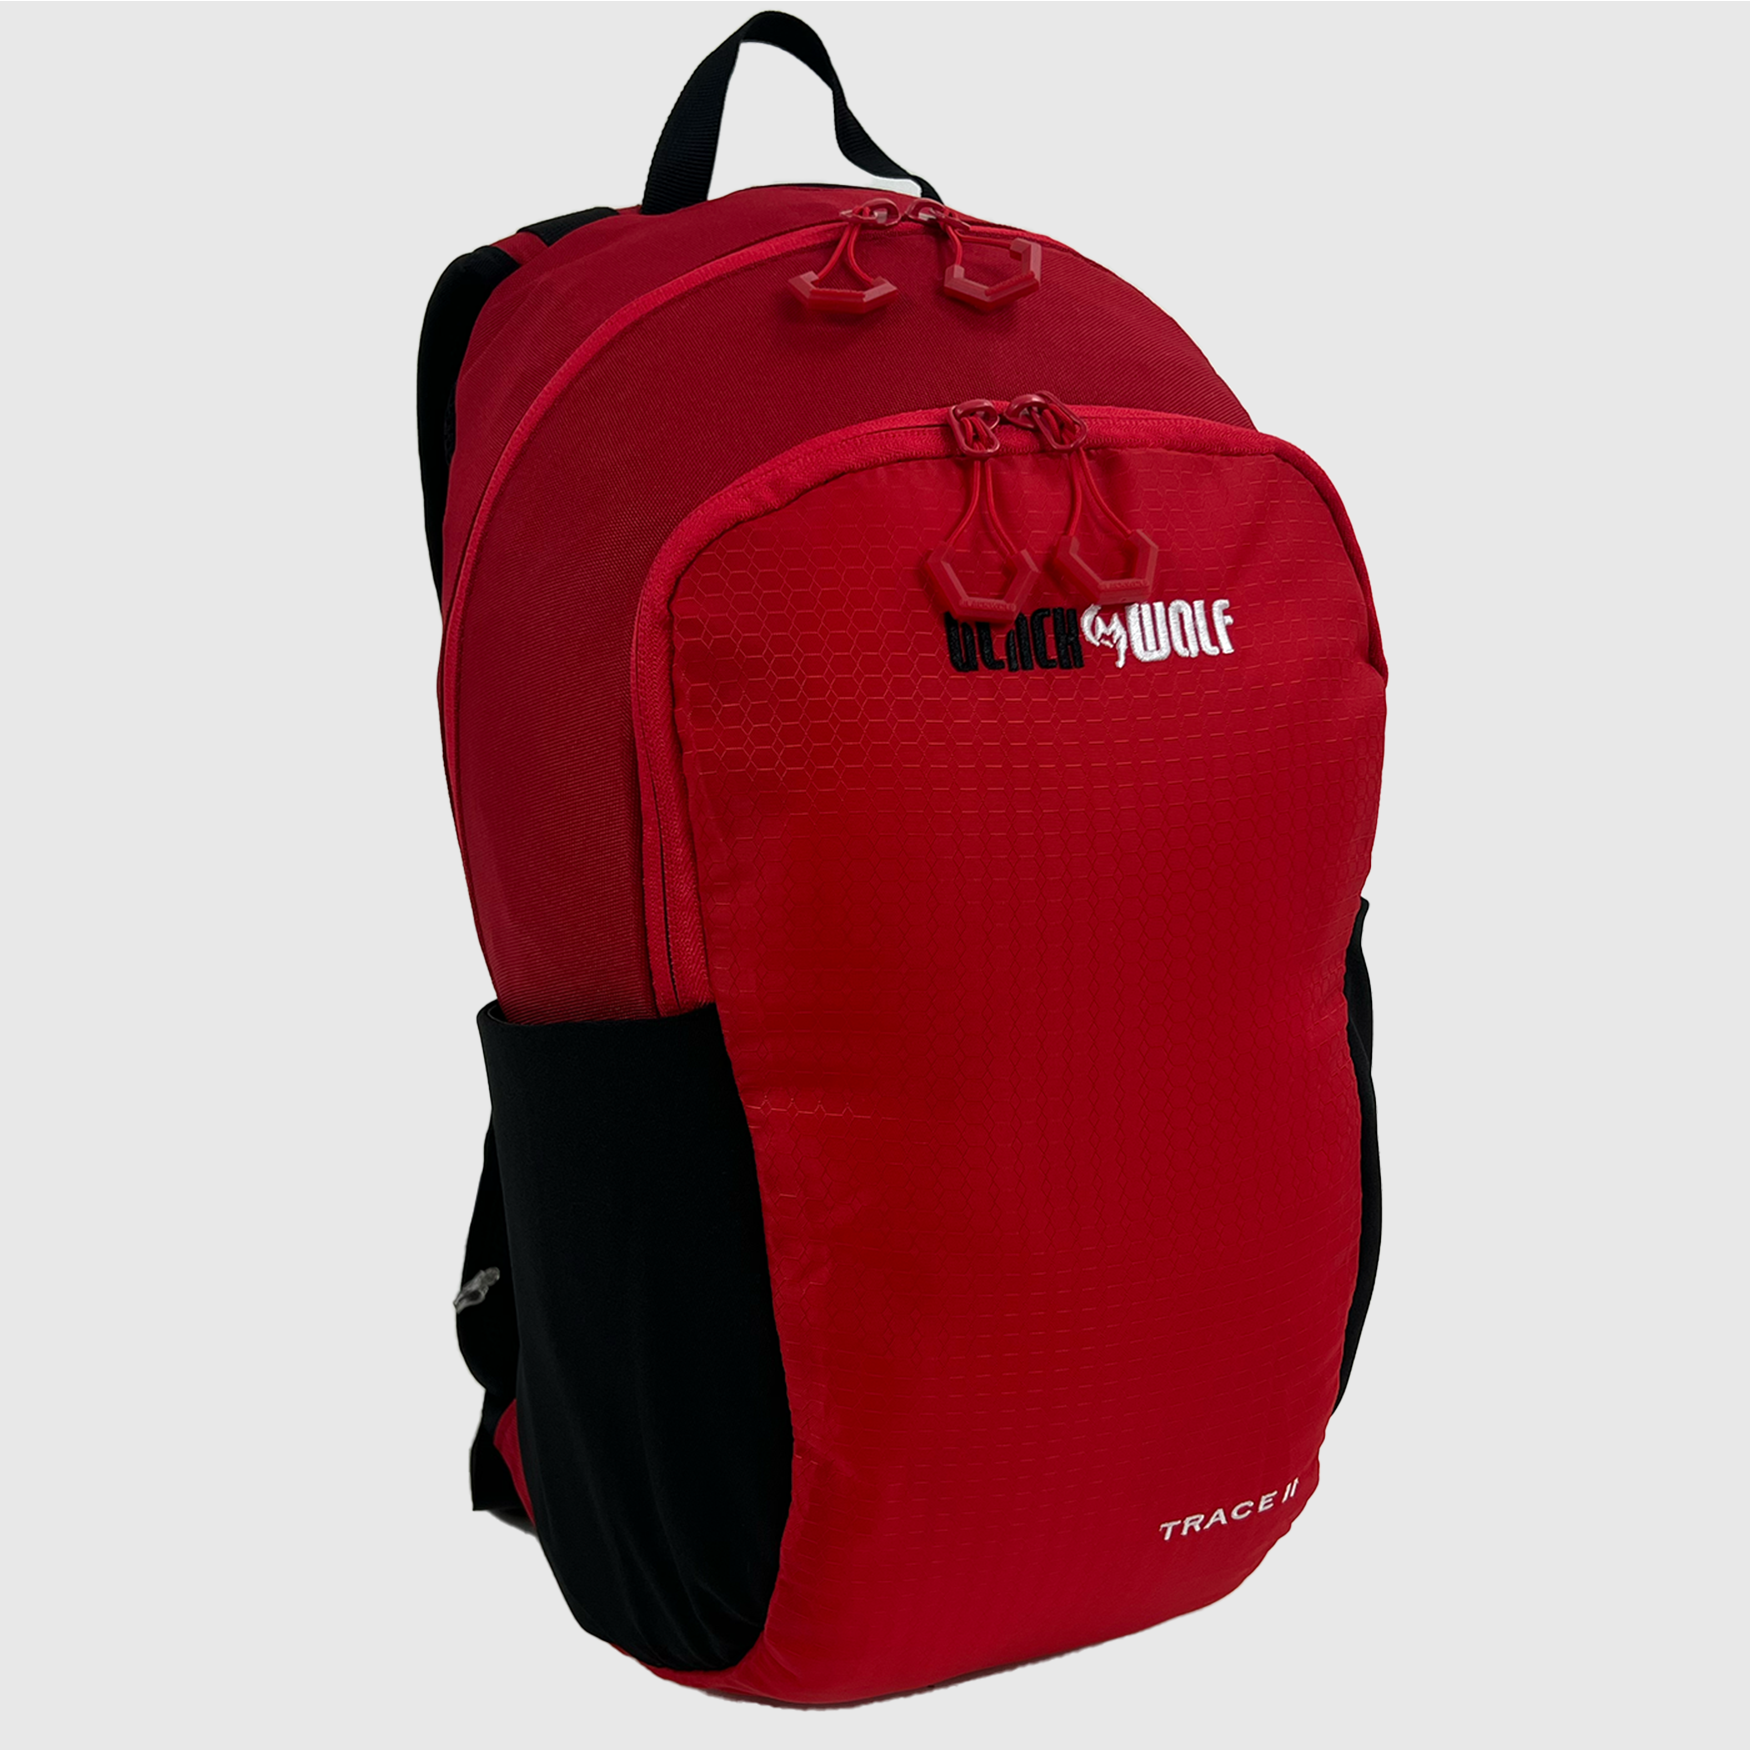 Black Wolf - Trace II 16L Backpack - True Red